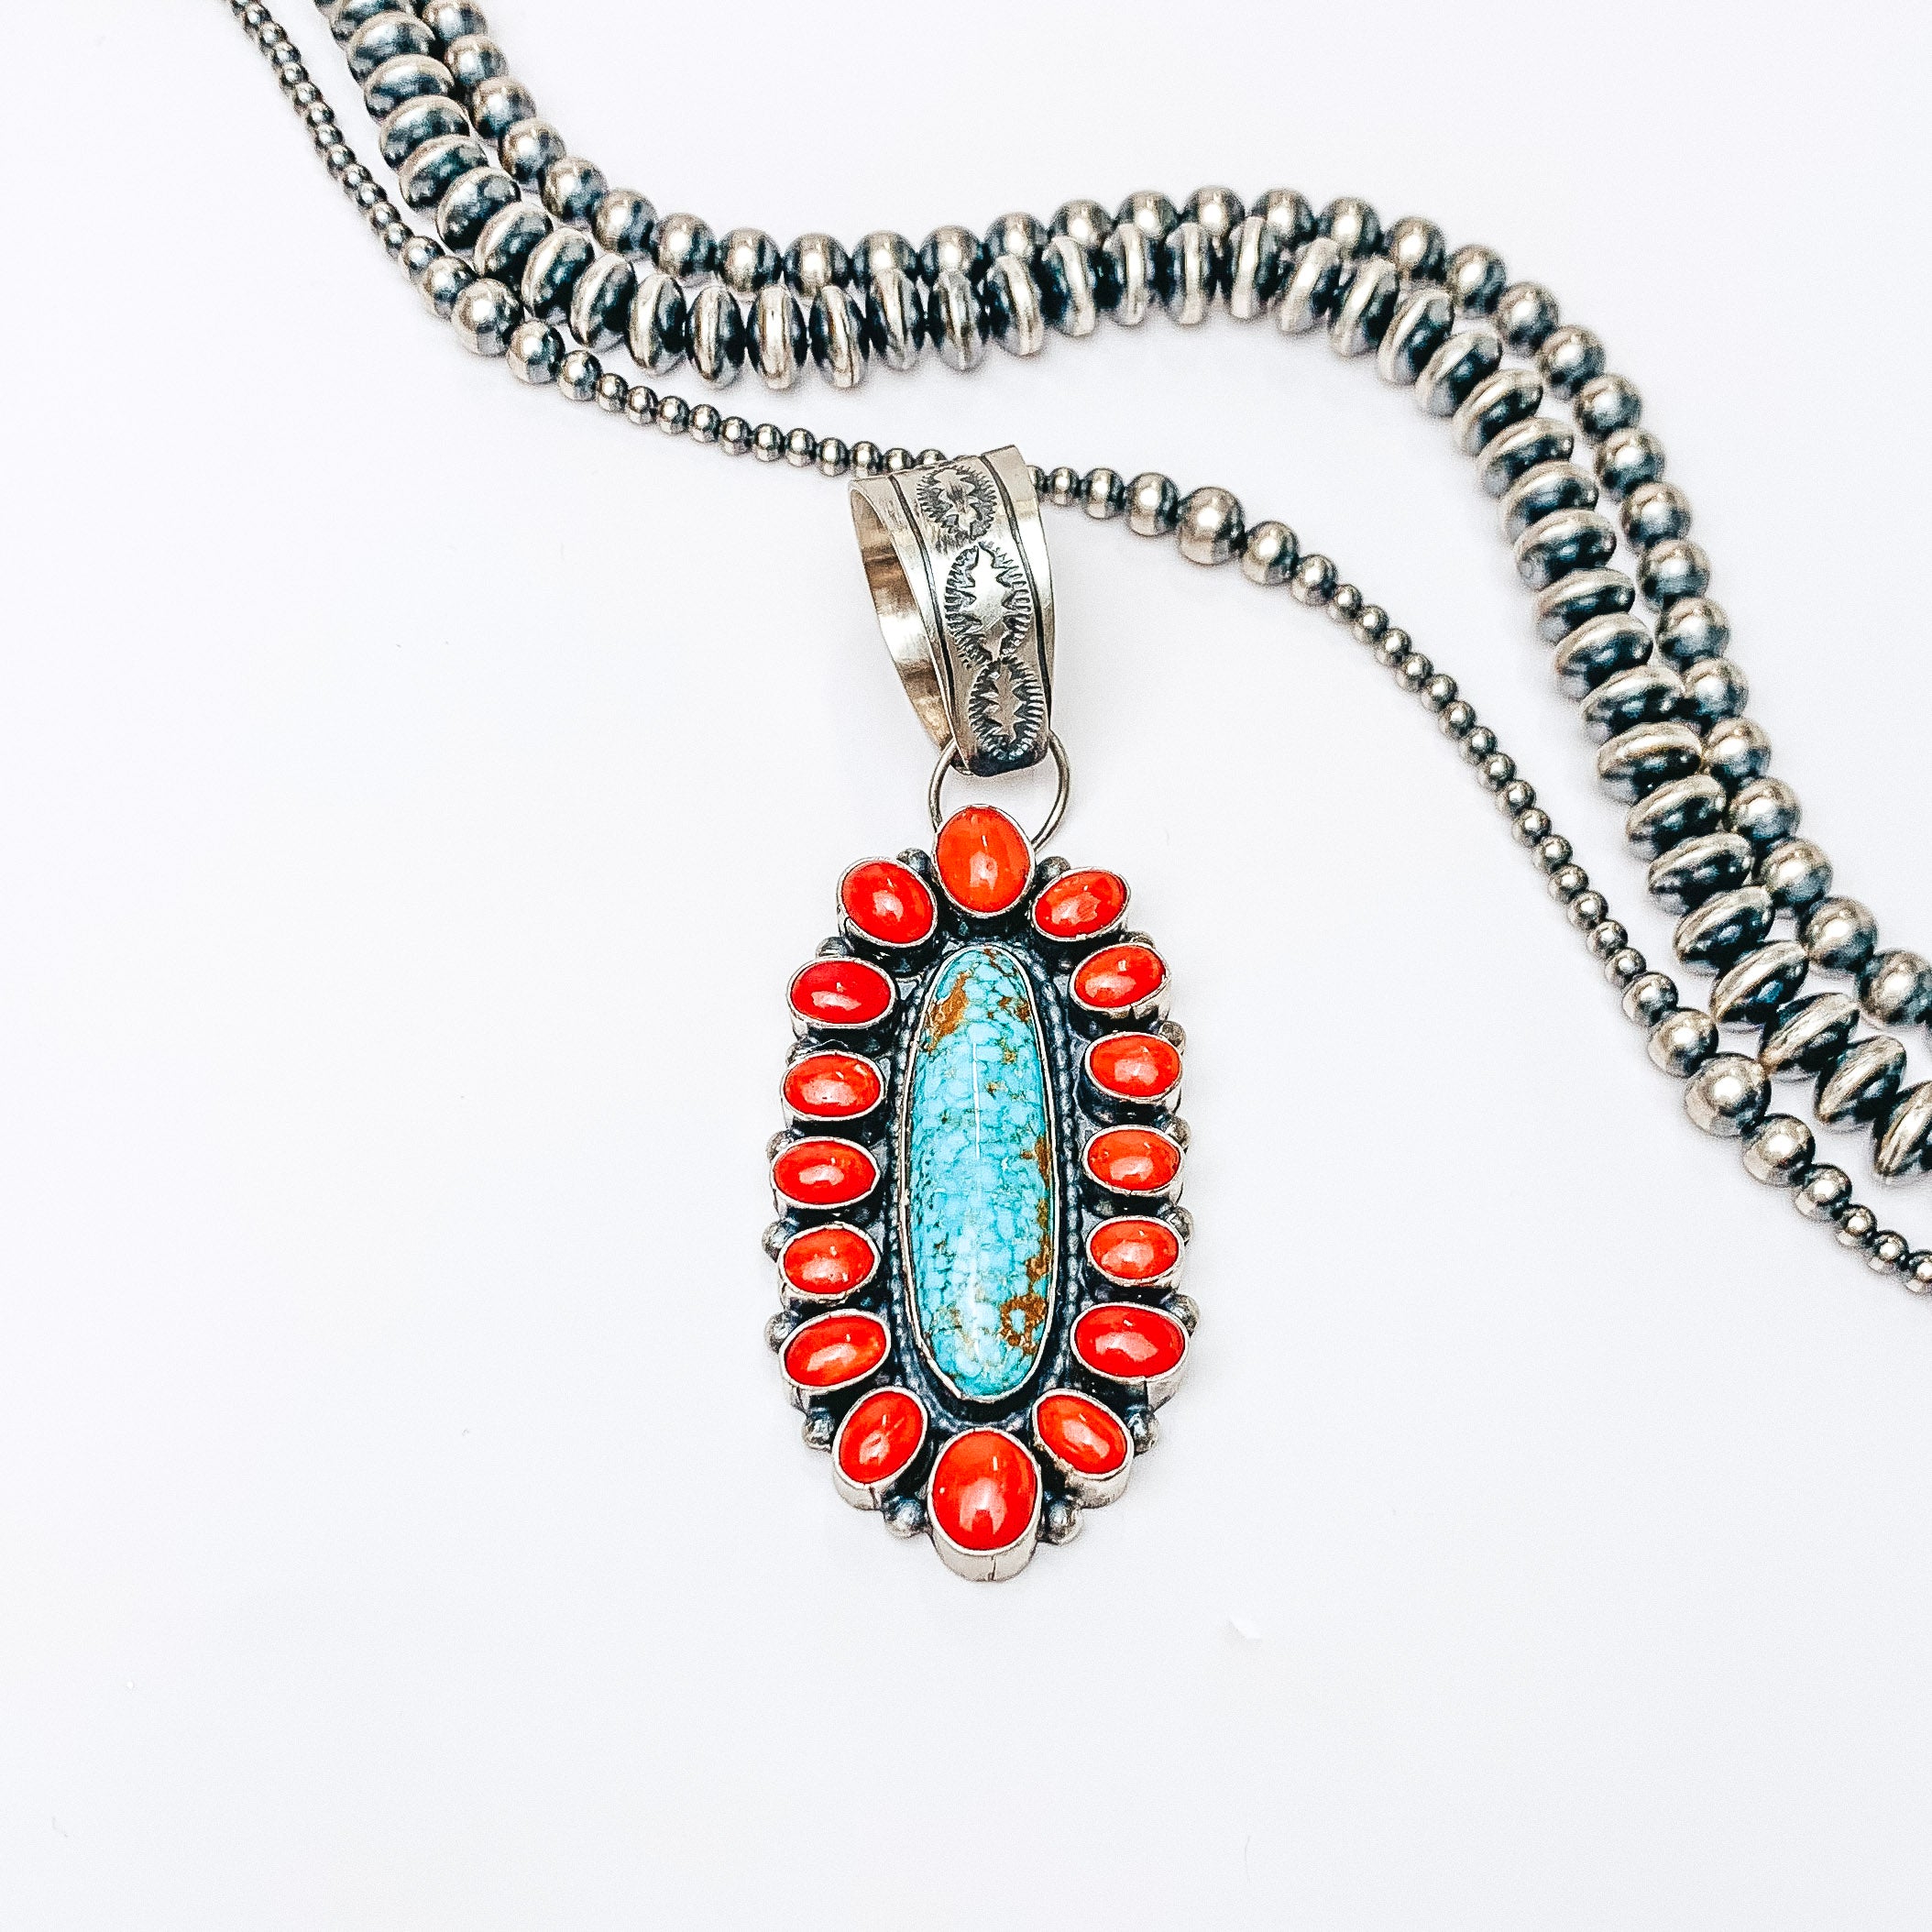 Centered in the picture is a large, oval, turquoise and coral pendant. Above the pendant is navajo pearls, all on a white background.